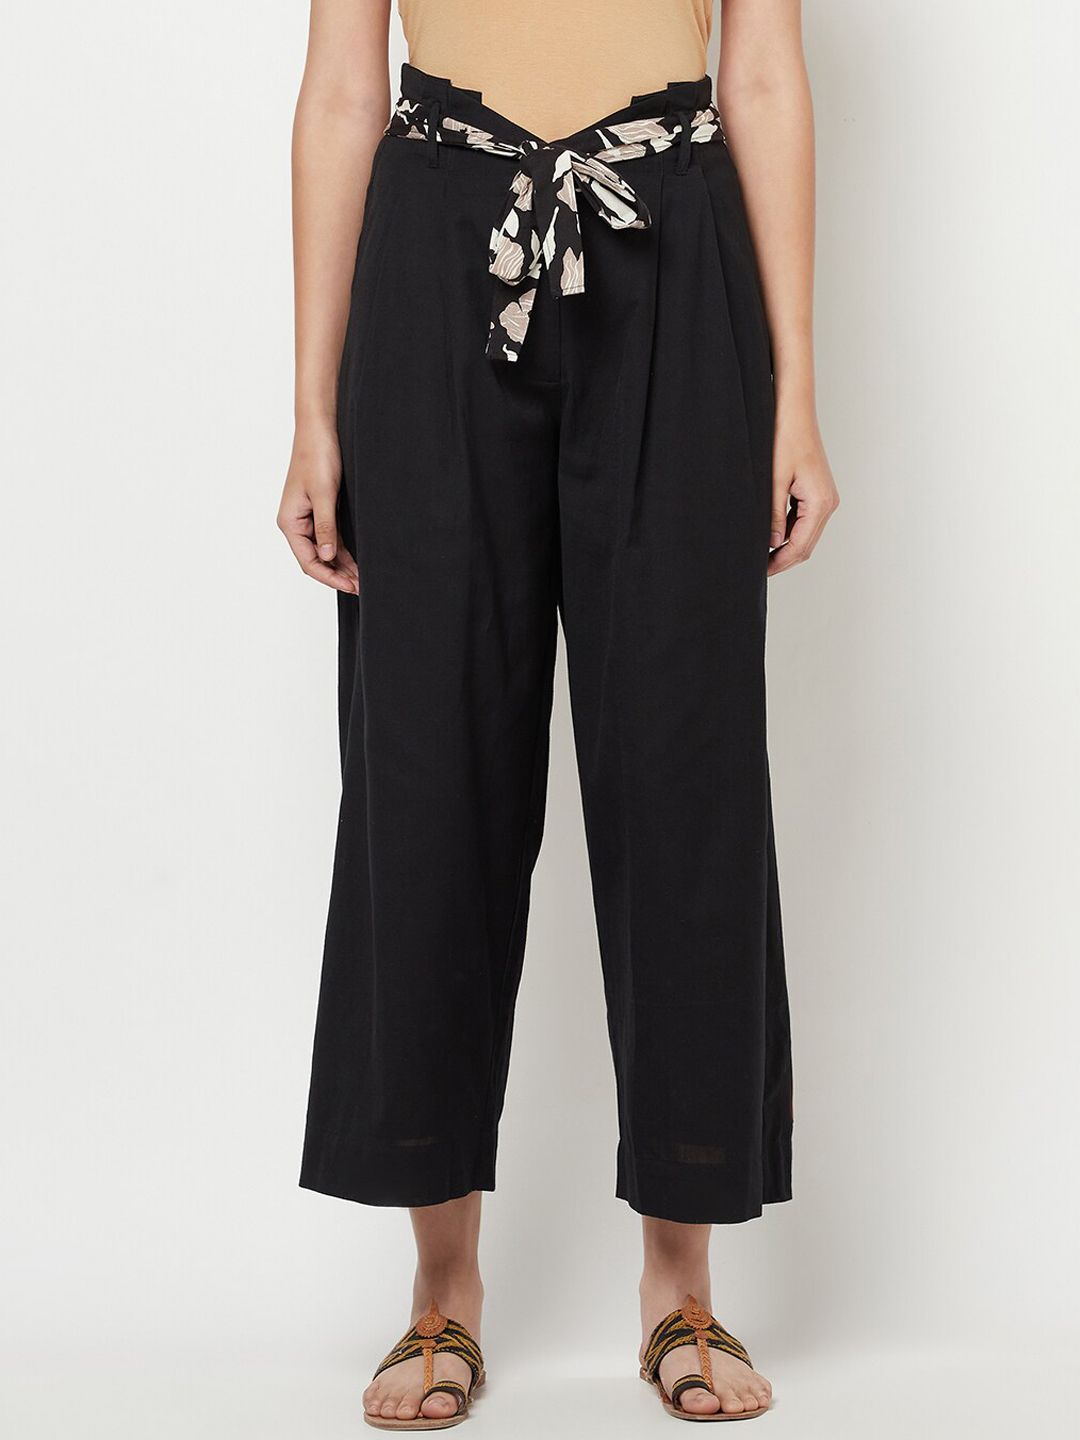 Fabindia Women Black Pleated Trousers with Belt Price in India